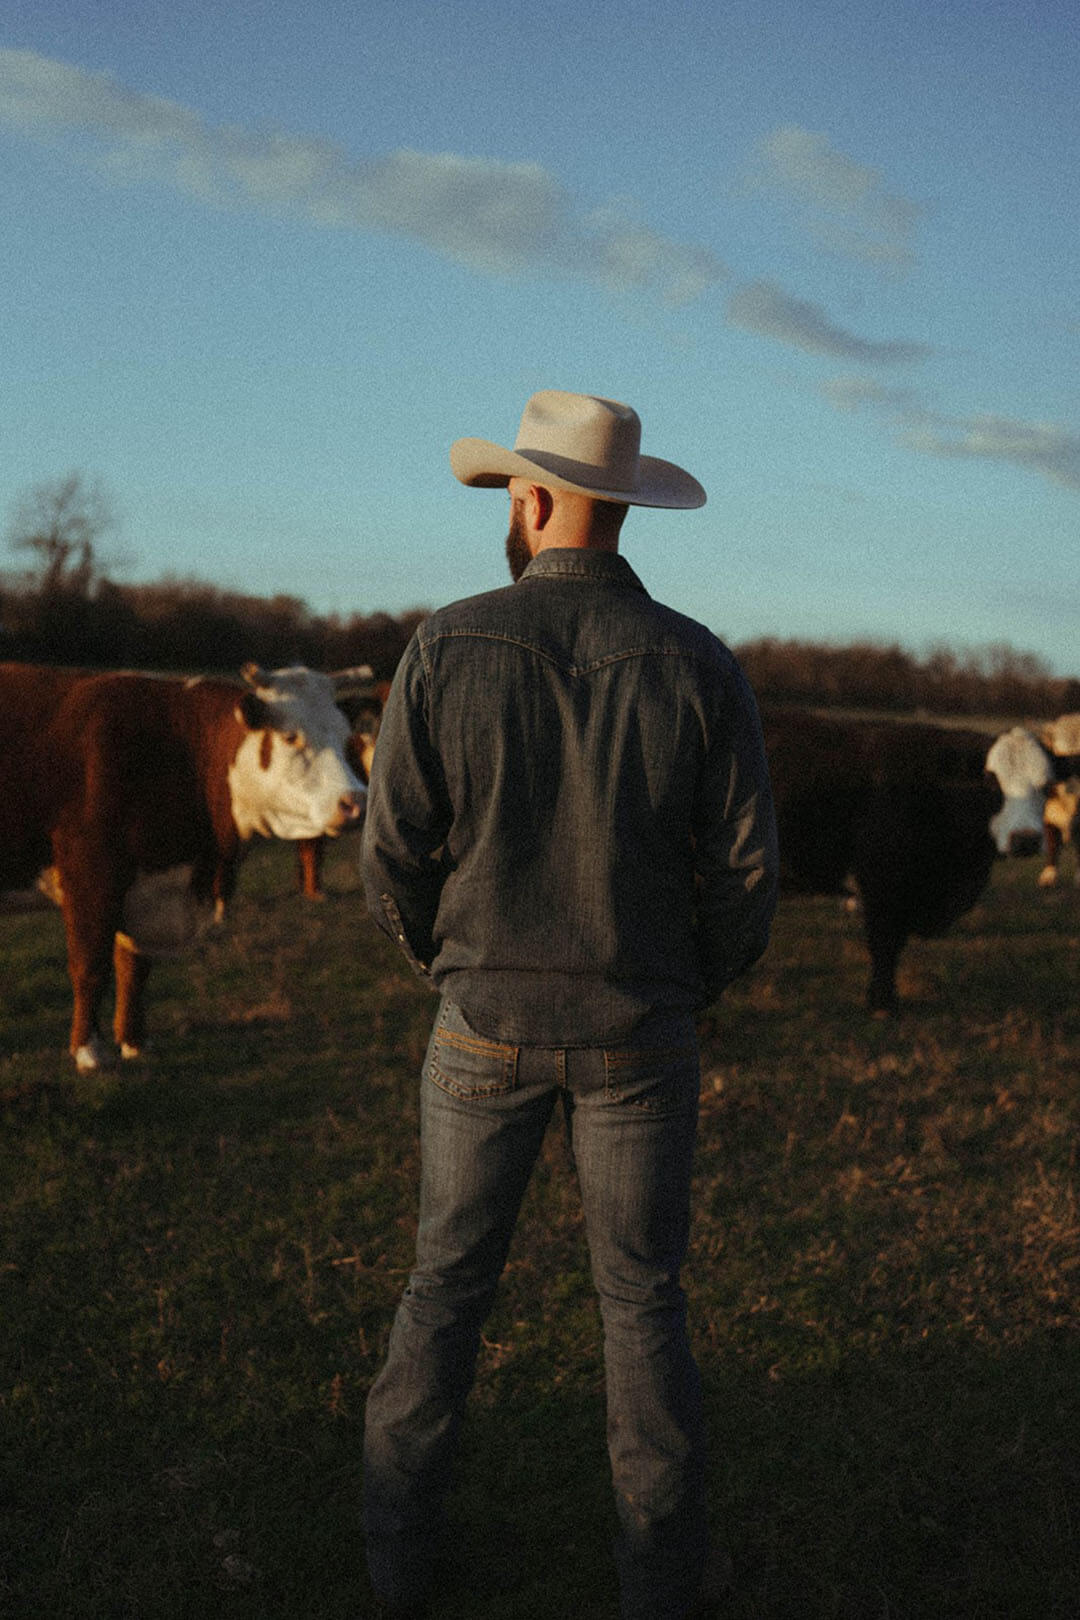 Man standing in field modeling the back side of the cowboy cut denim snap long sleev work shirt.  The shirt features a collar.